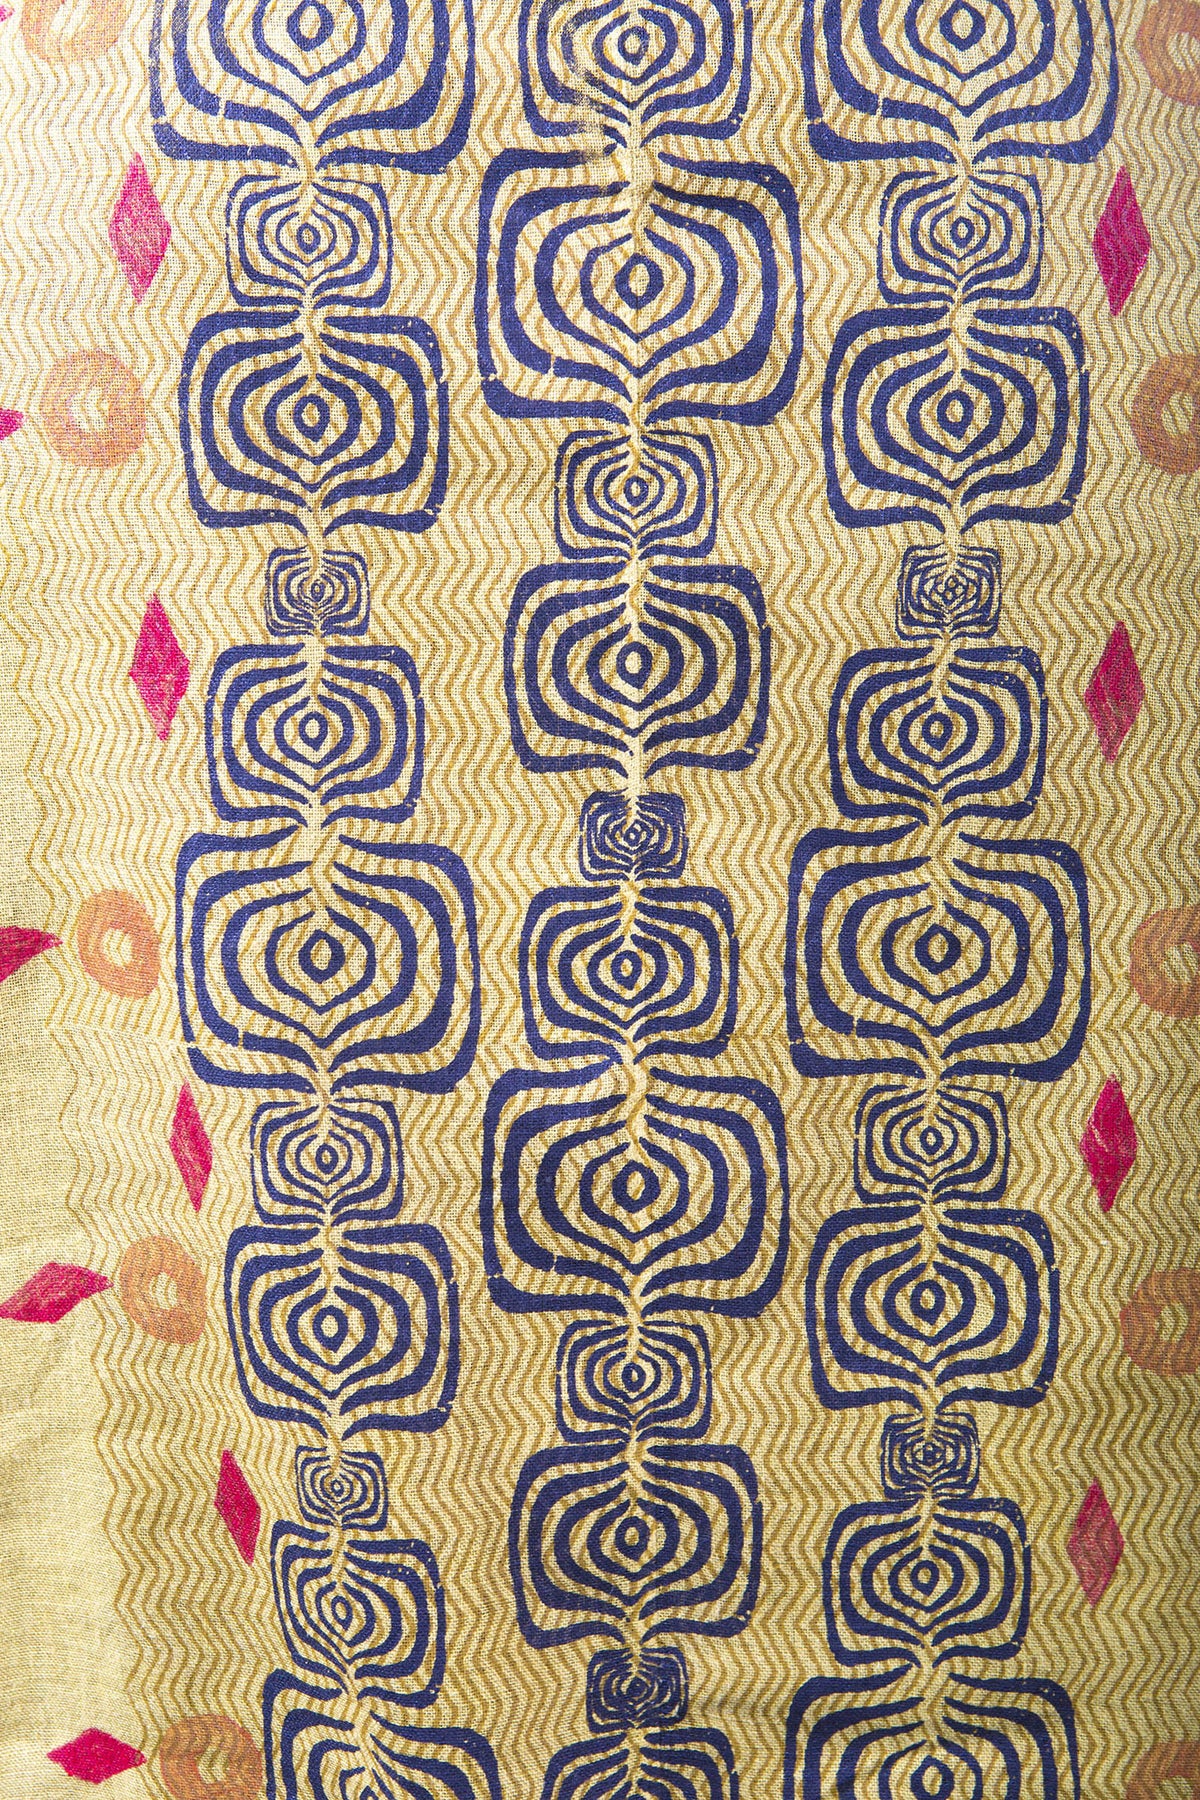 Hand Printed African Lace